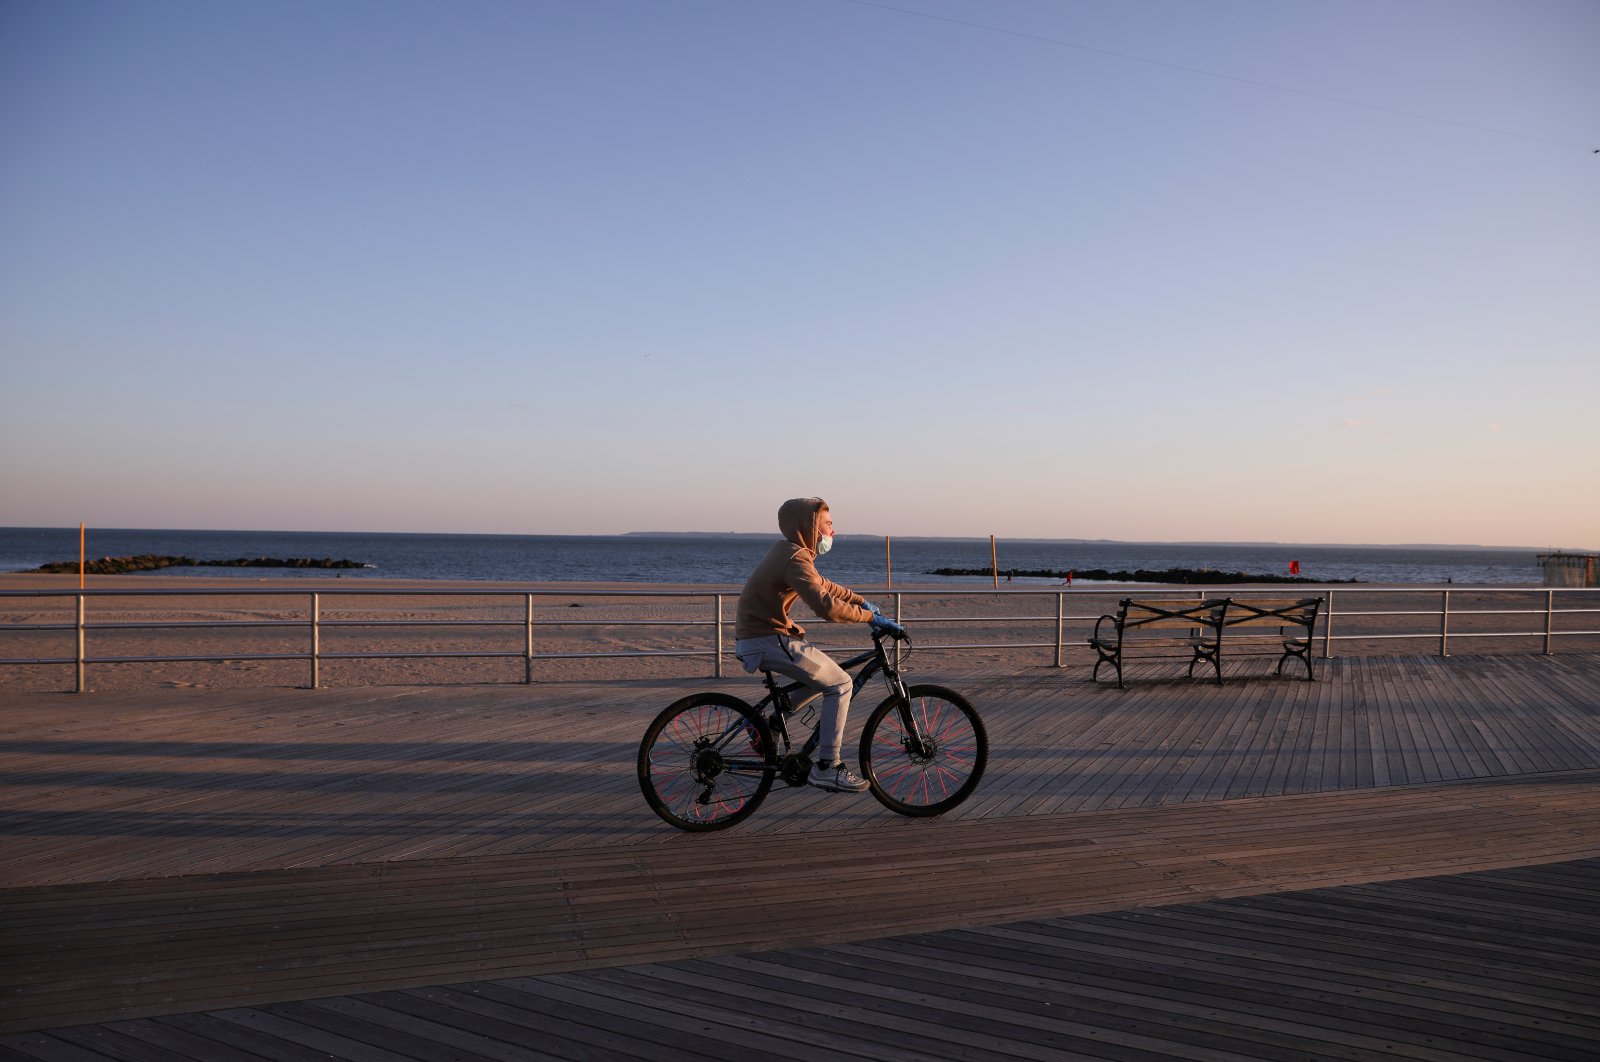 A bicyclist wears a mask and cycles along the mostly empty Coney Island boardwalk, Brooklyn, New York, U.S., April 11, 2020. (REUTERS Photo)